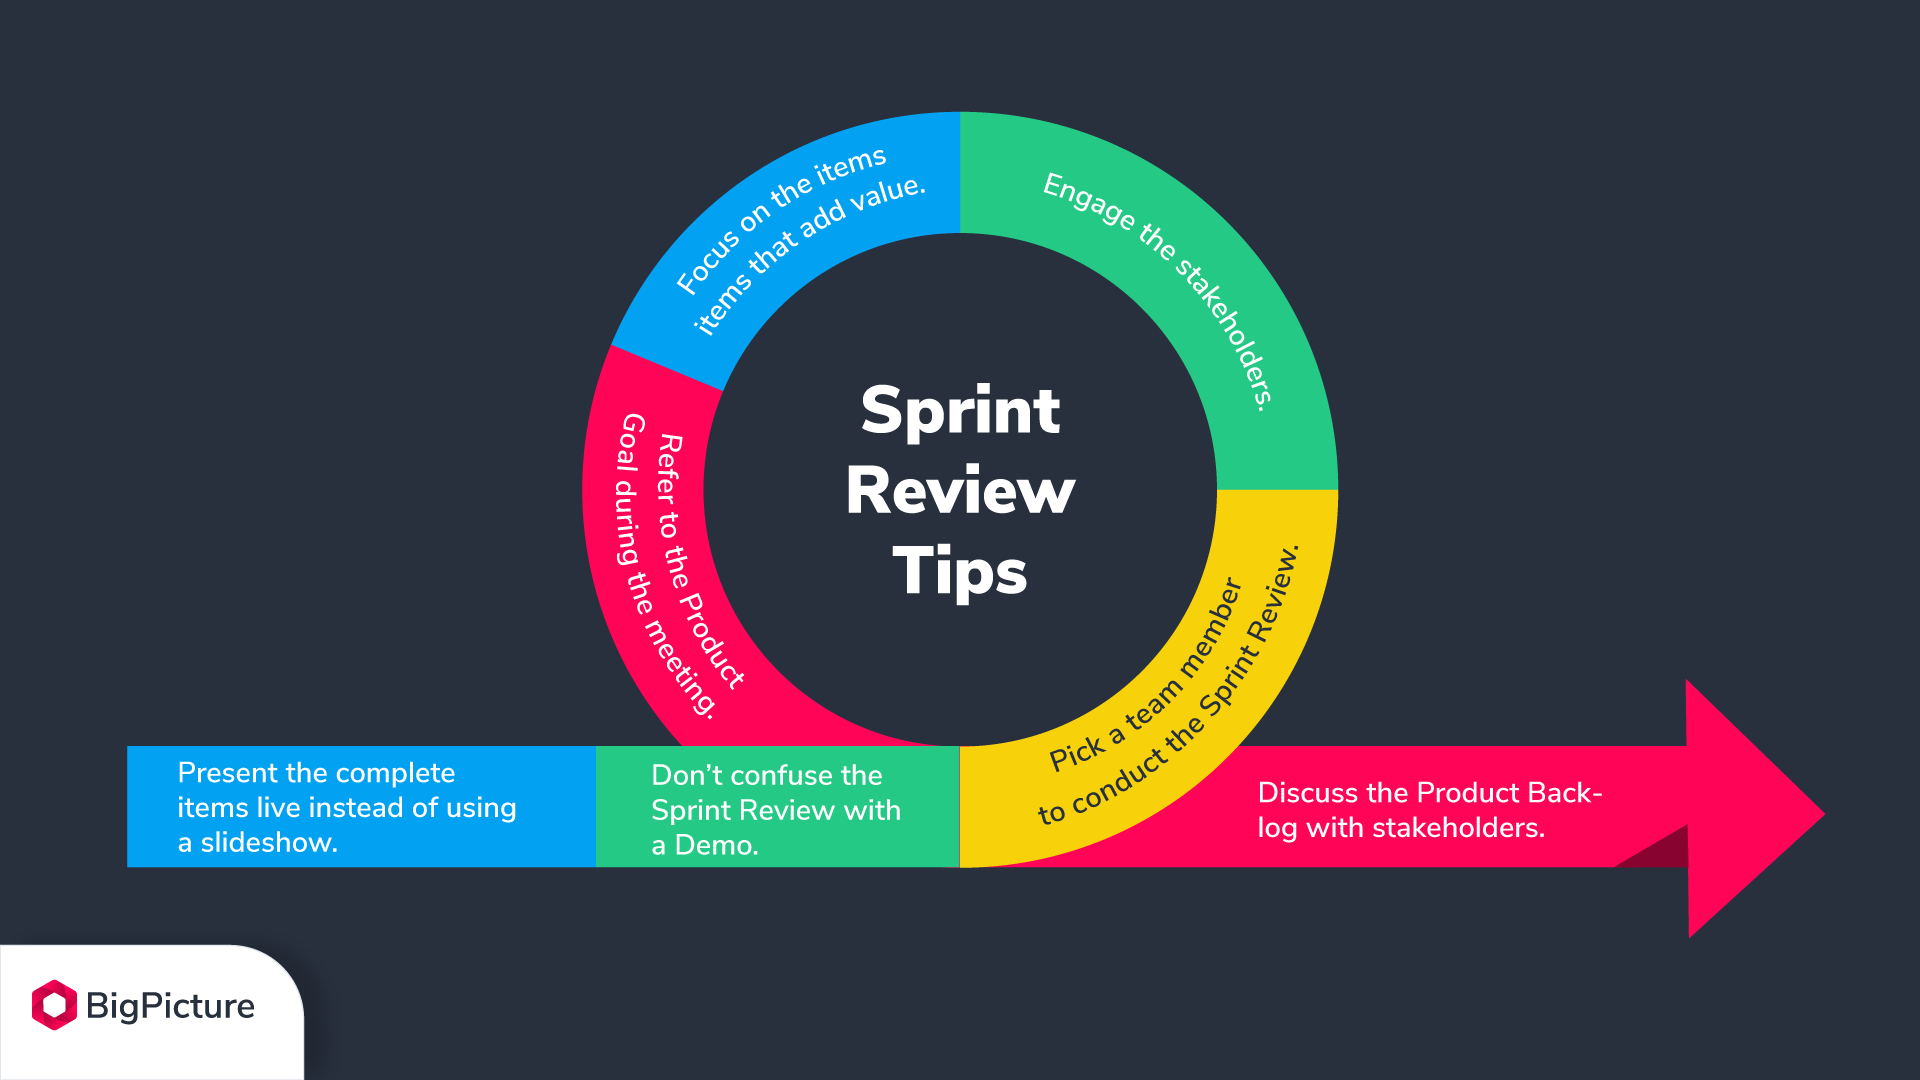 7 Sprint Review tips in Scrum in visual form